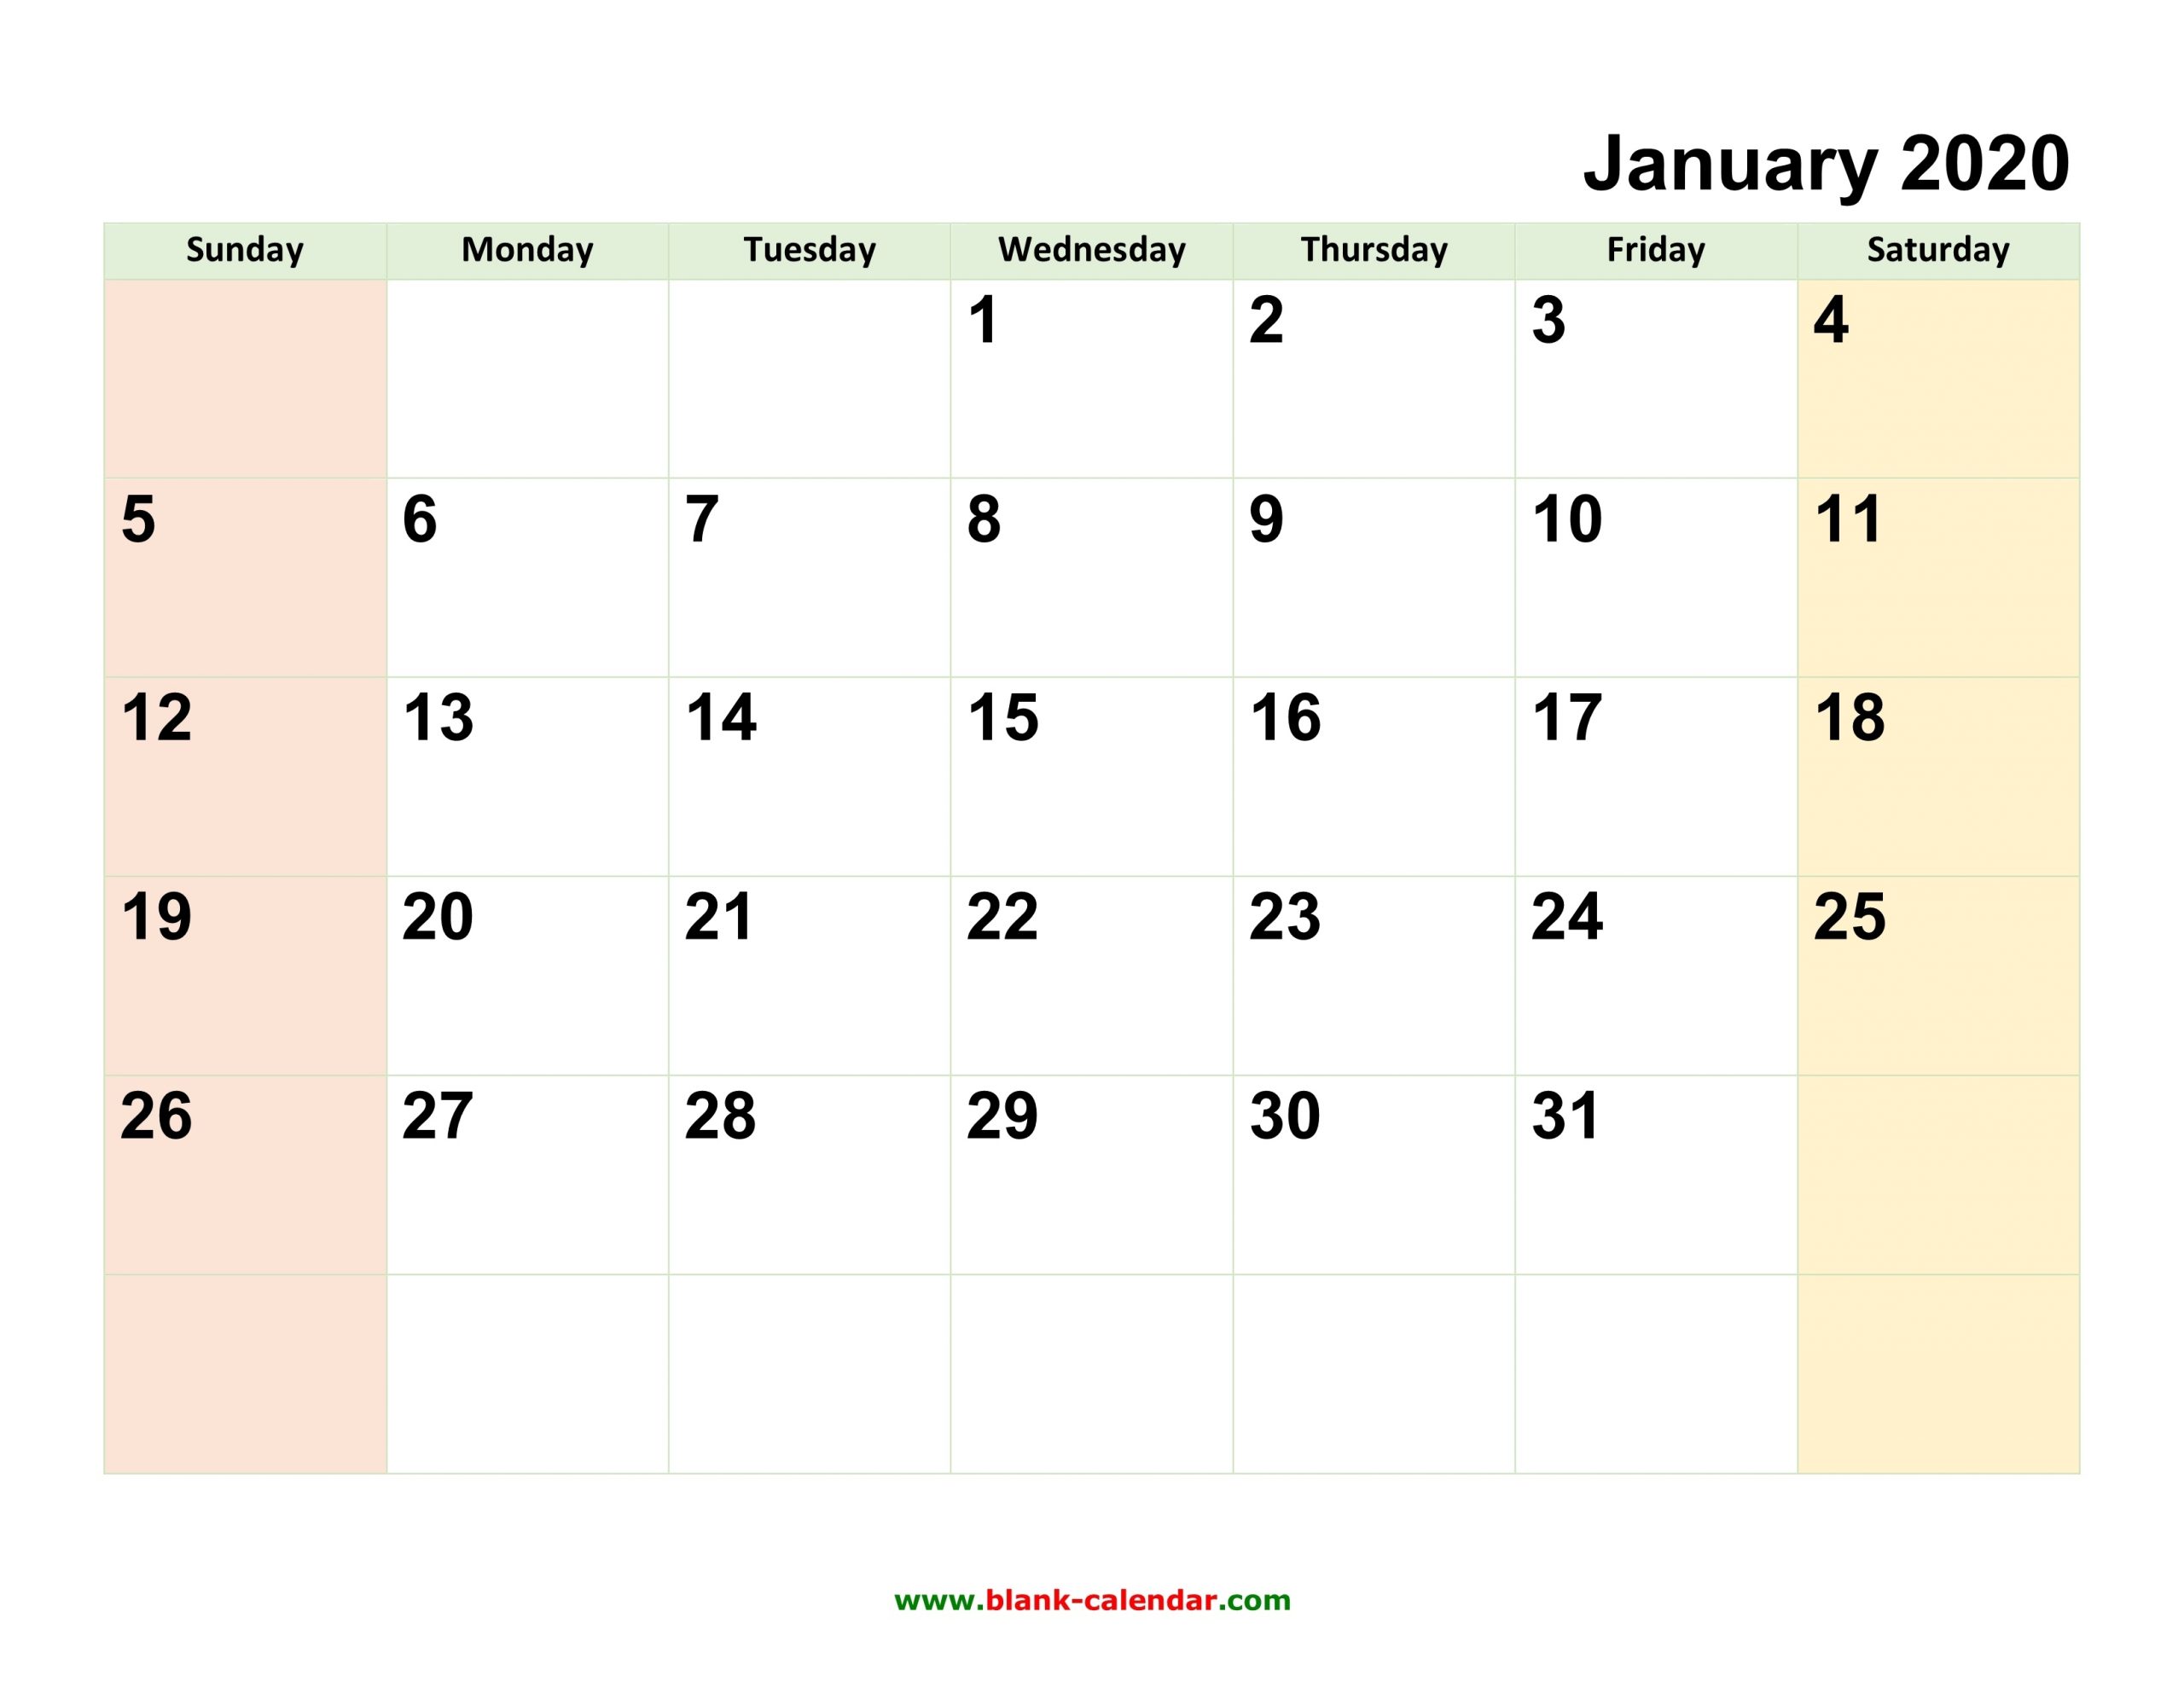 Monthly Calendar 2020 | Free Download, Editable And Printable Calendar Template That Can Be Edited